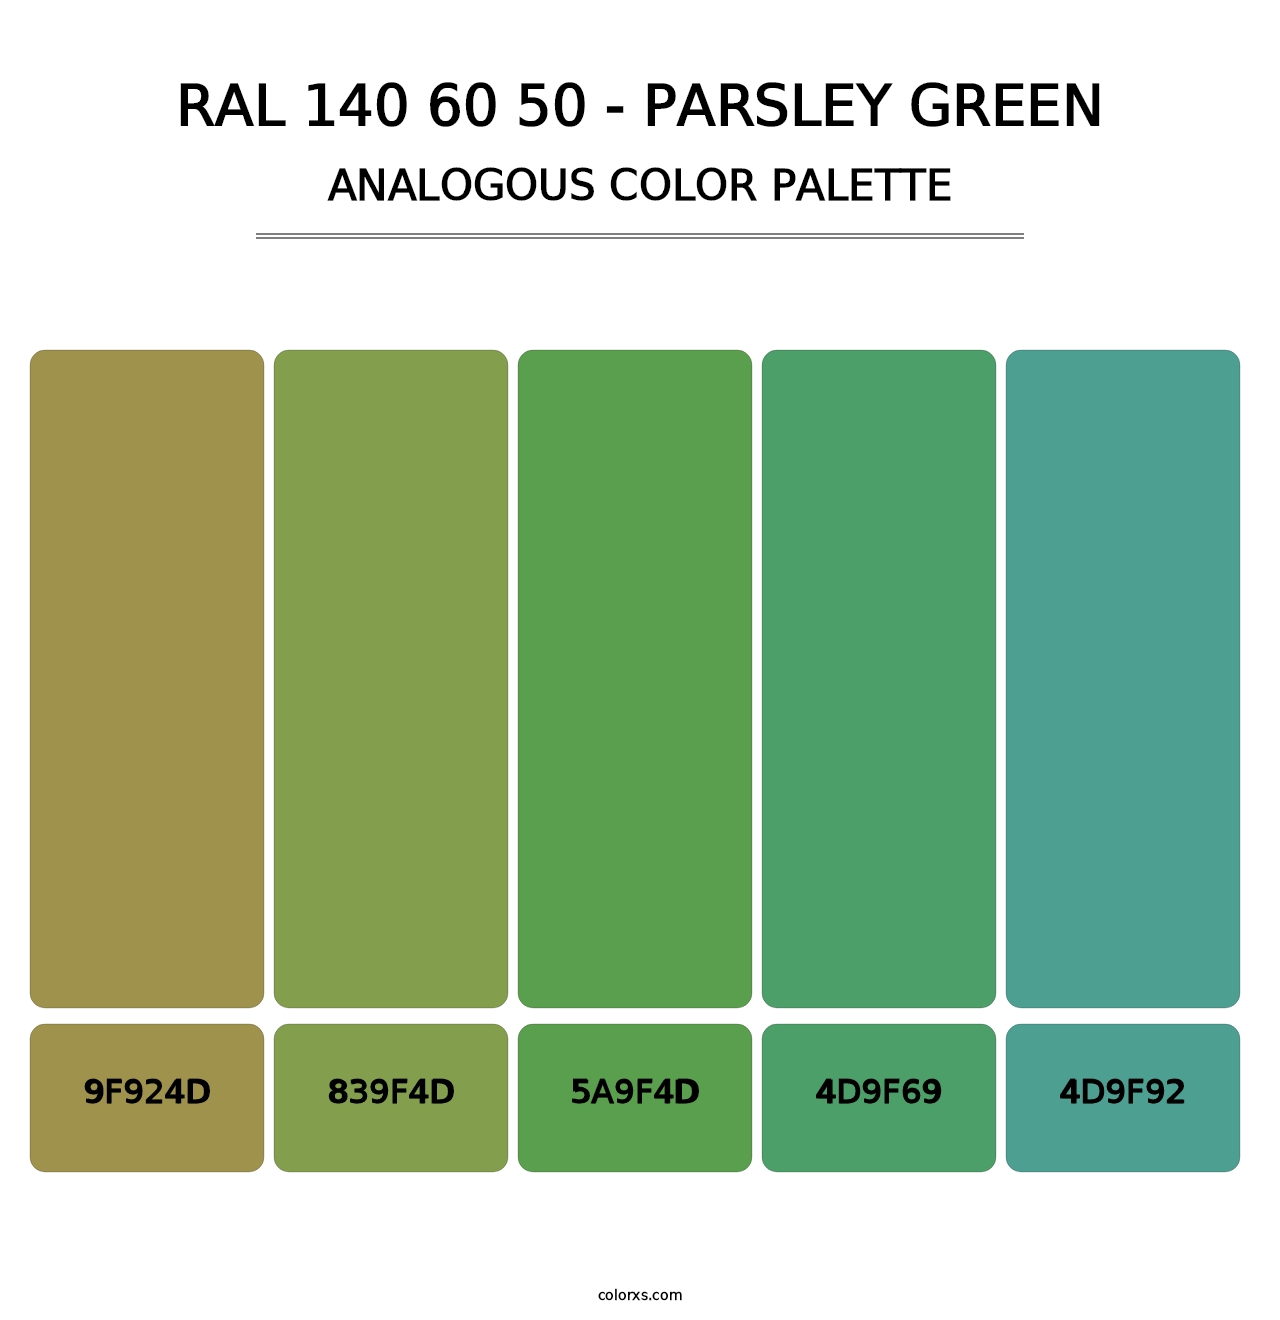 RAL 140 60 50 - Parsley Green - Analogous Color Palette